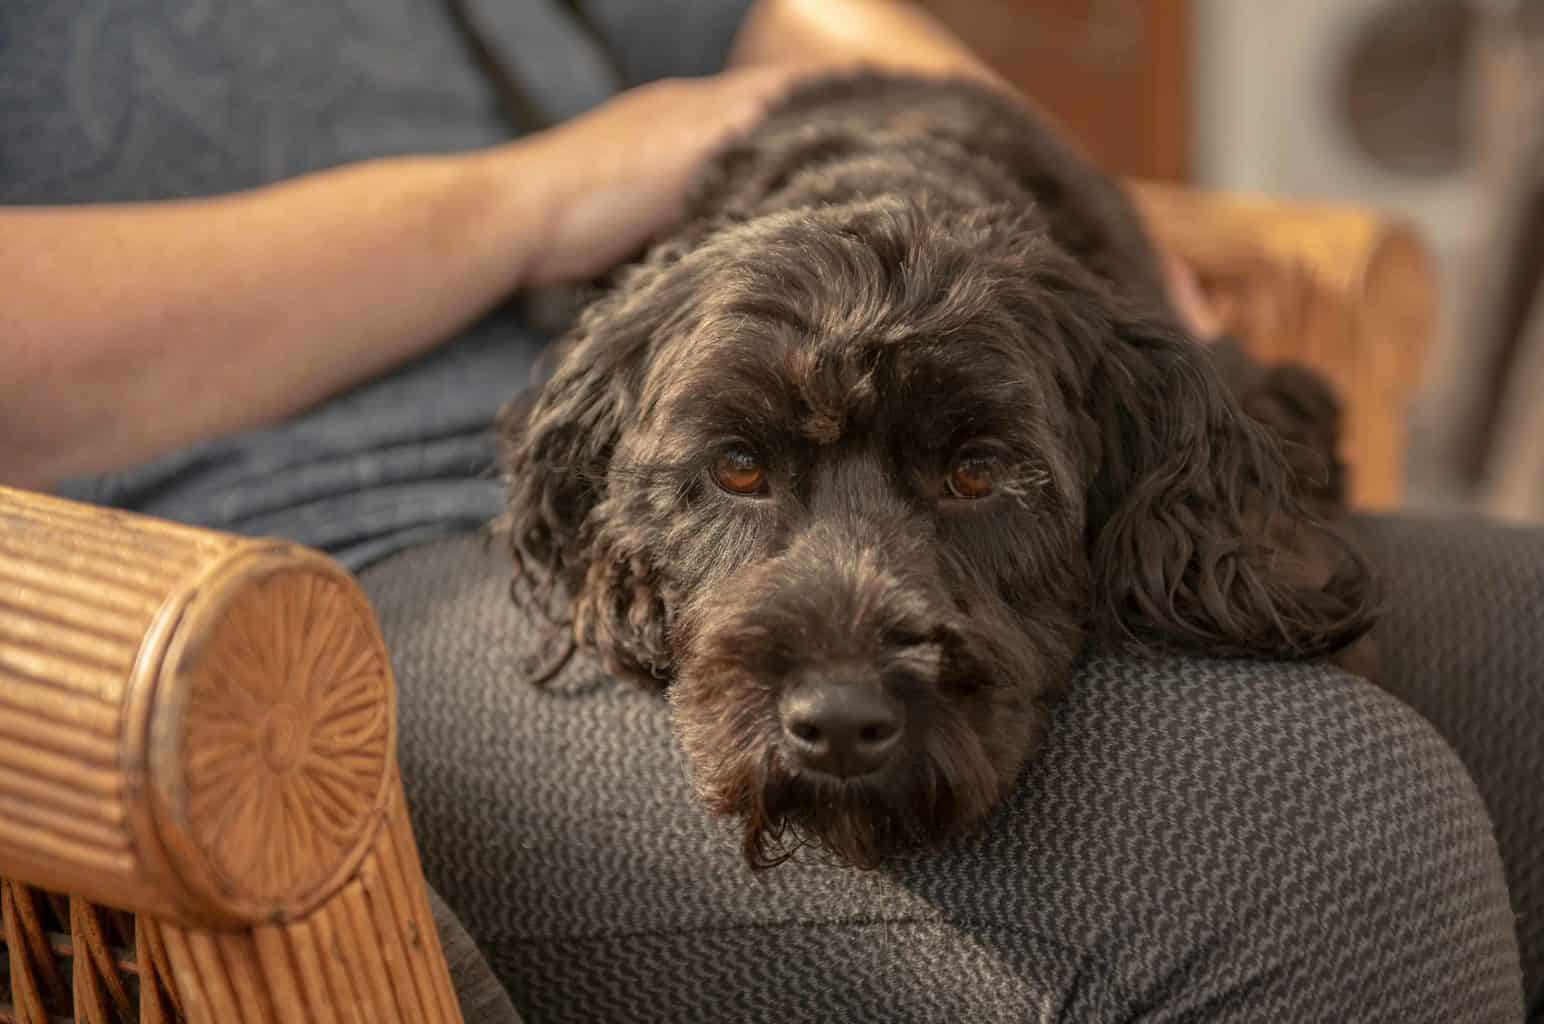 Cockapoo sits on its owner's lap. While there is no natural "cure" for dog aggression, there are many steps you can take to help minimize the behavior.